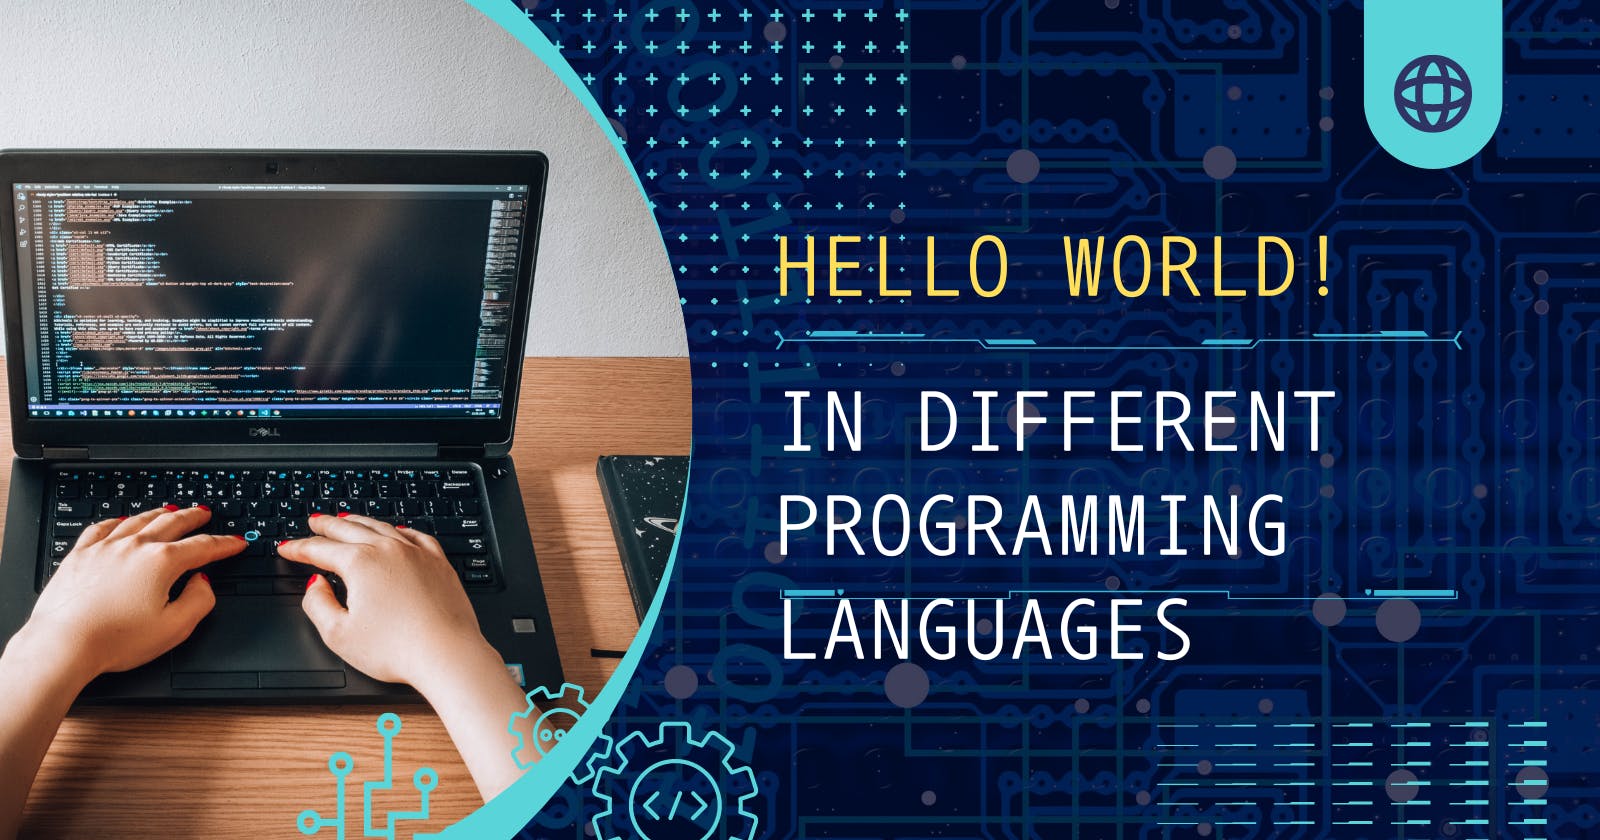 "Hello World" In Different Programming Languages